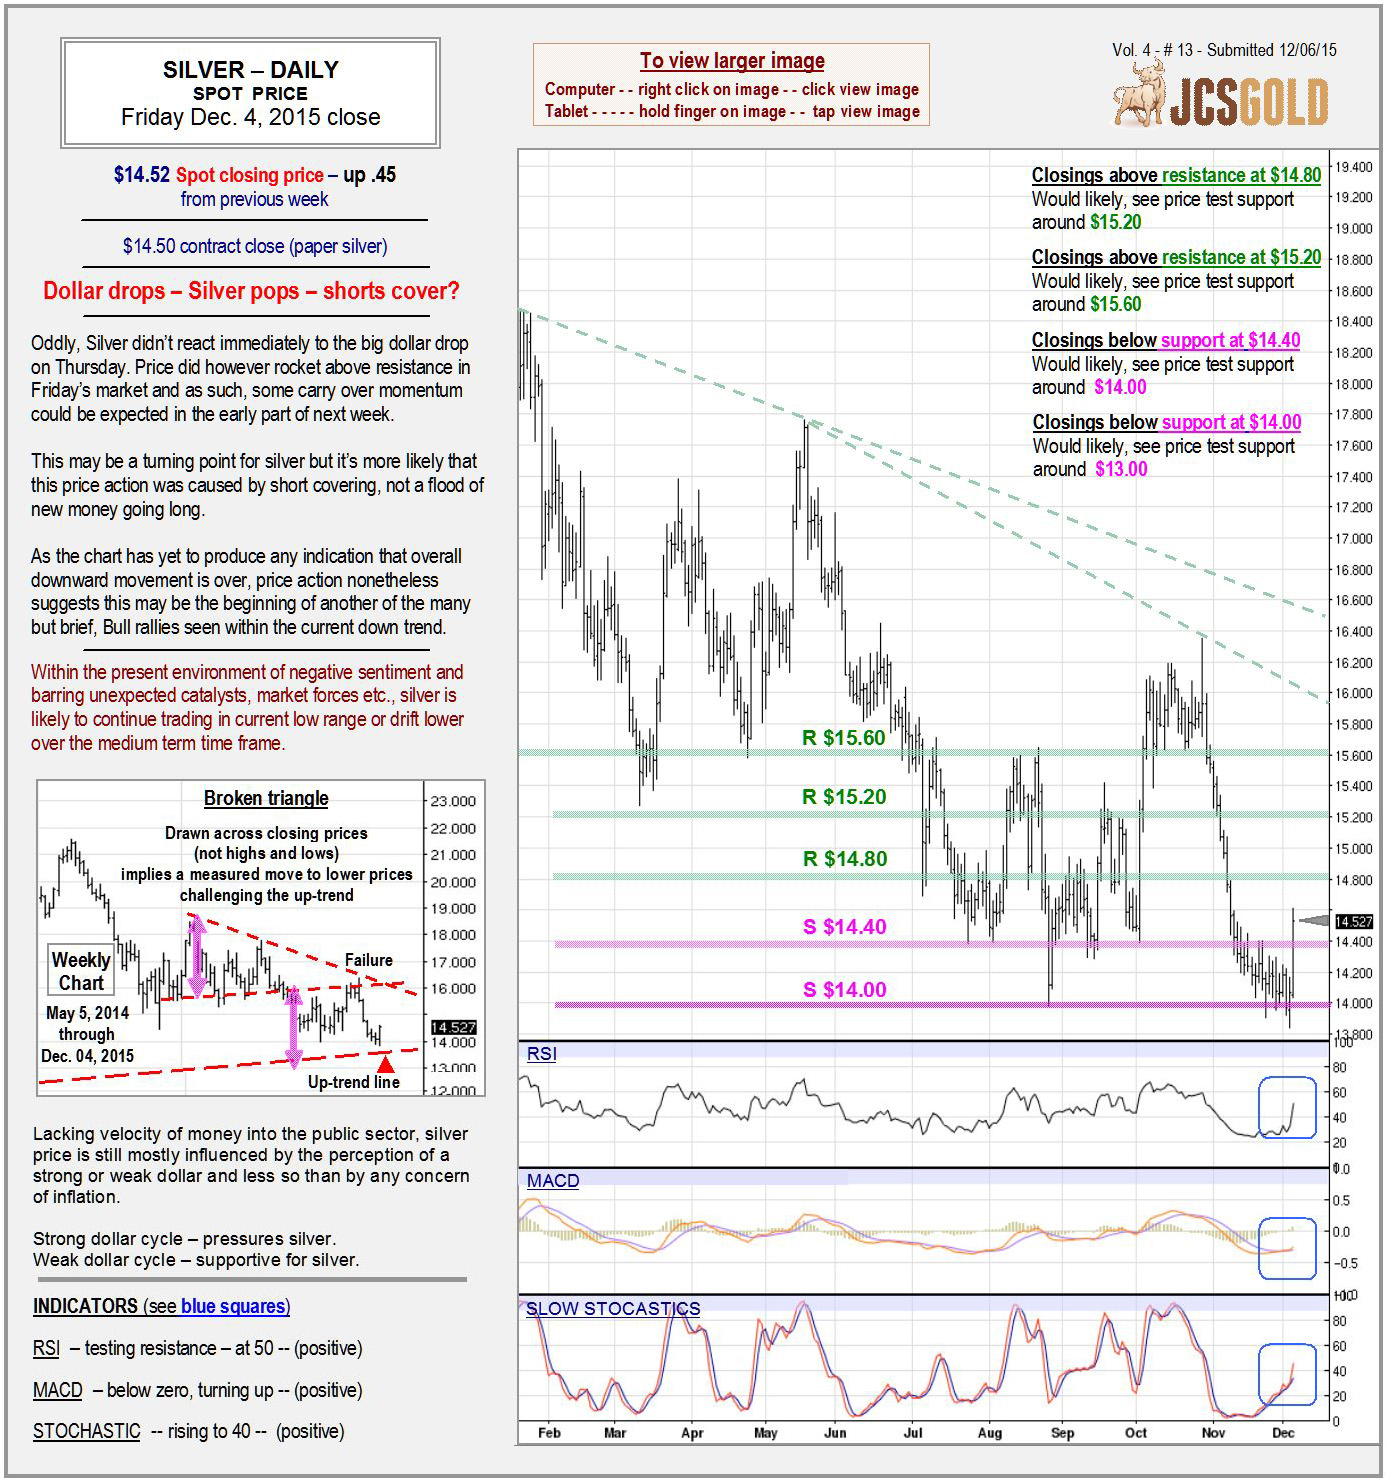 Dec 4, 2015 chart & commentary